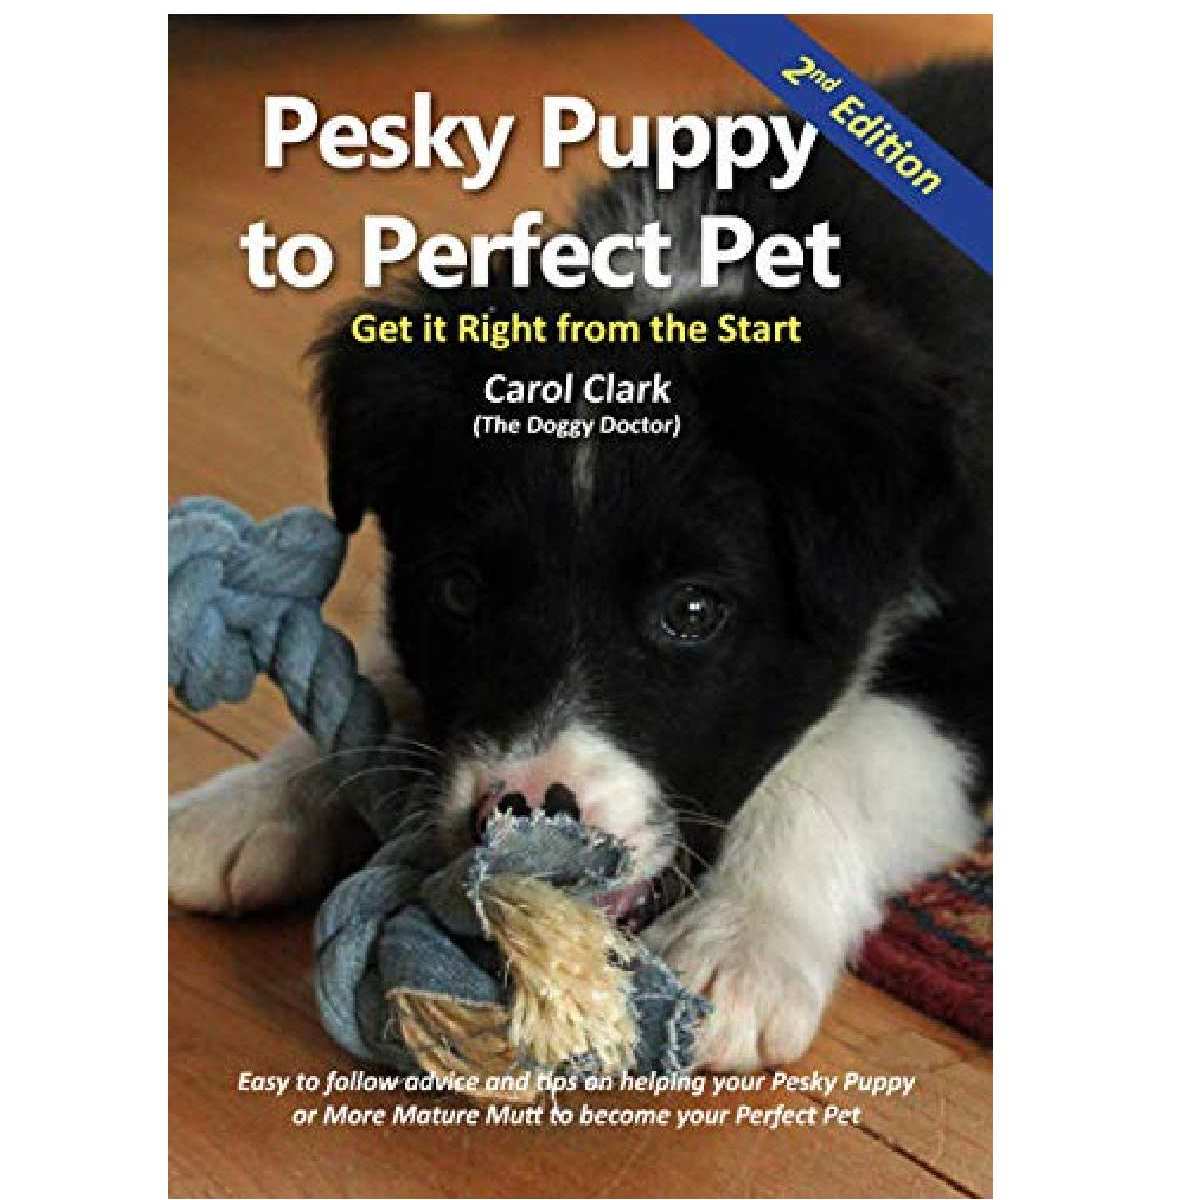 Pesky Puppy to Perfect Pet